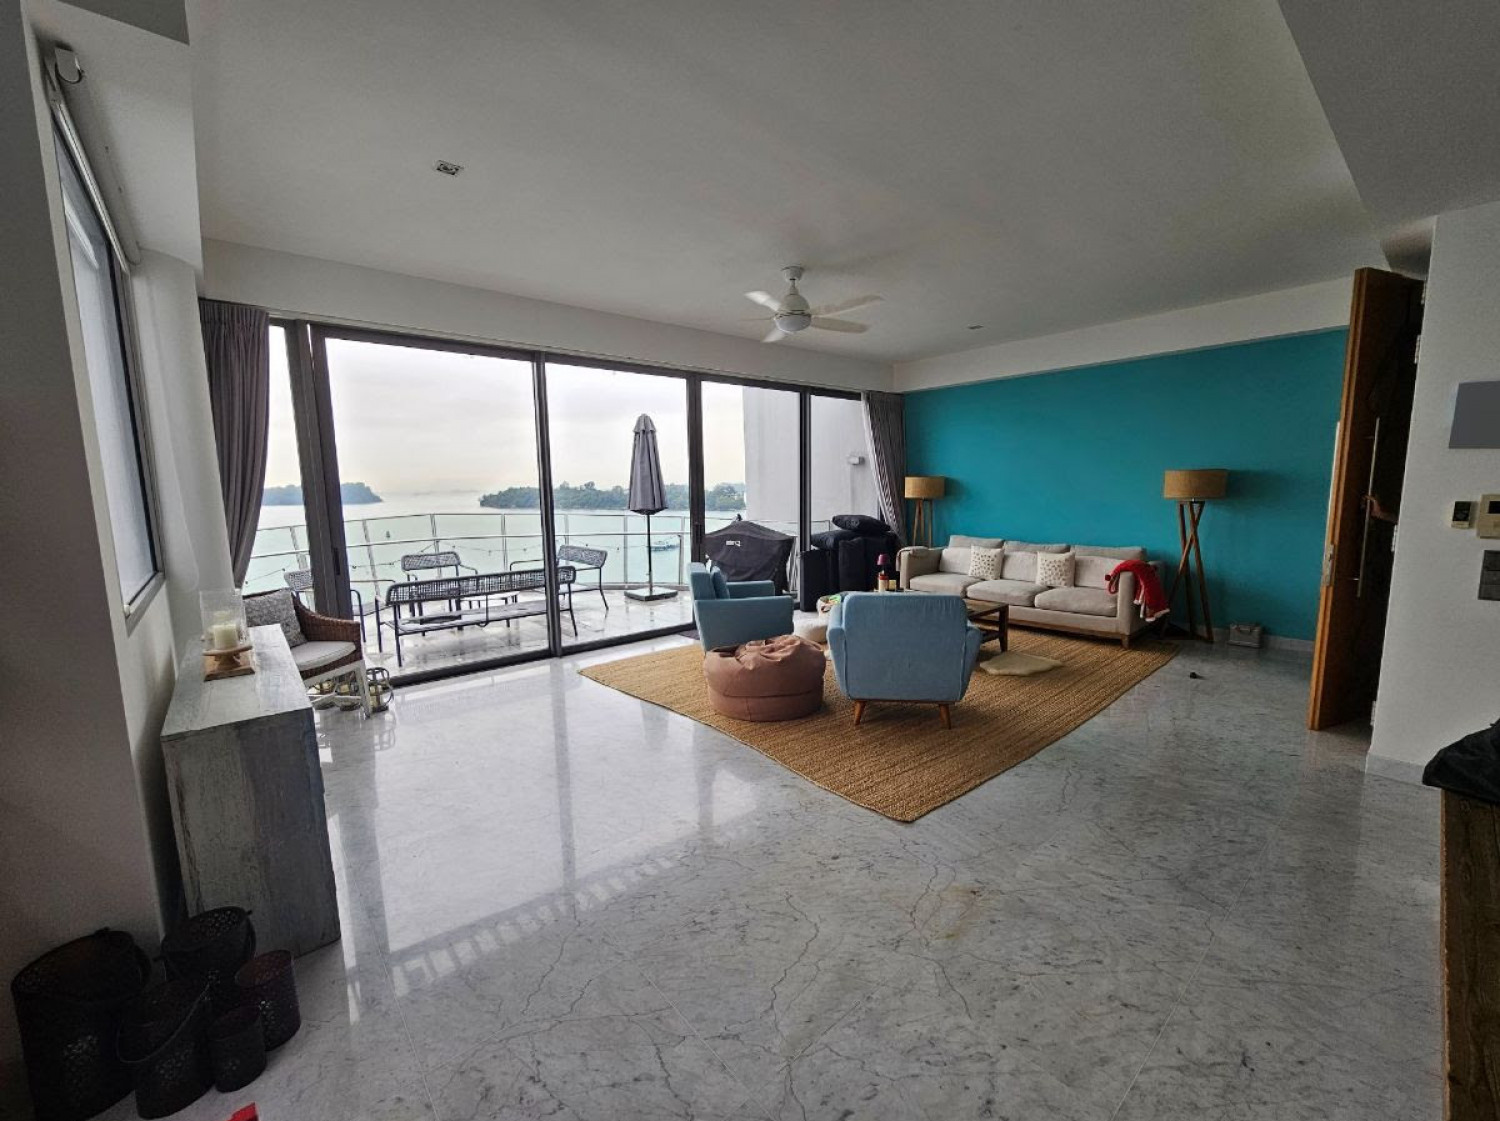 Duplex penthouse at Seascape for sale at $7.8 mil - Property News